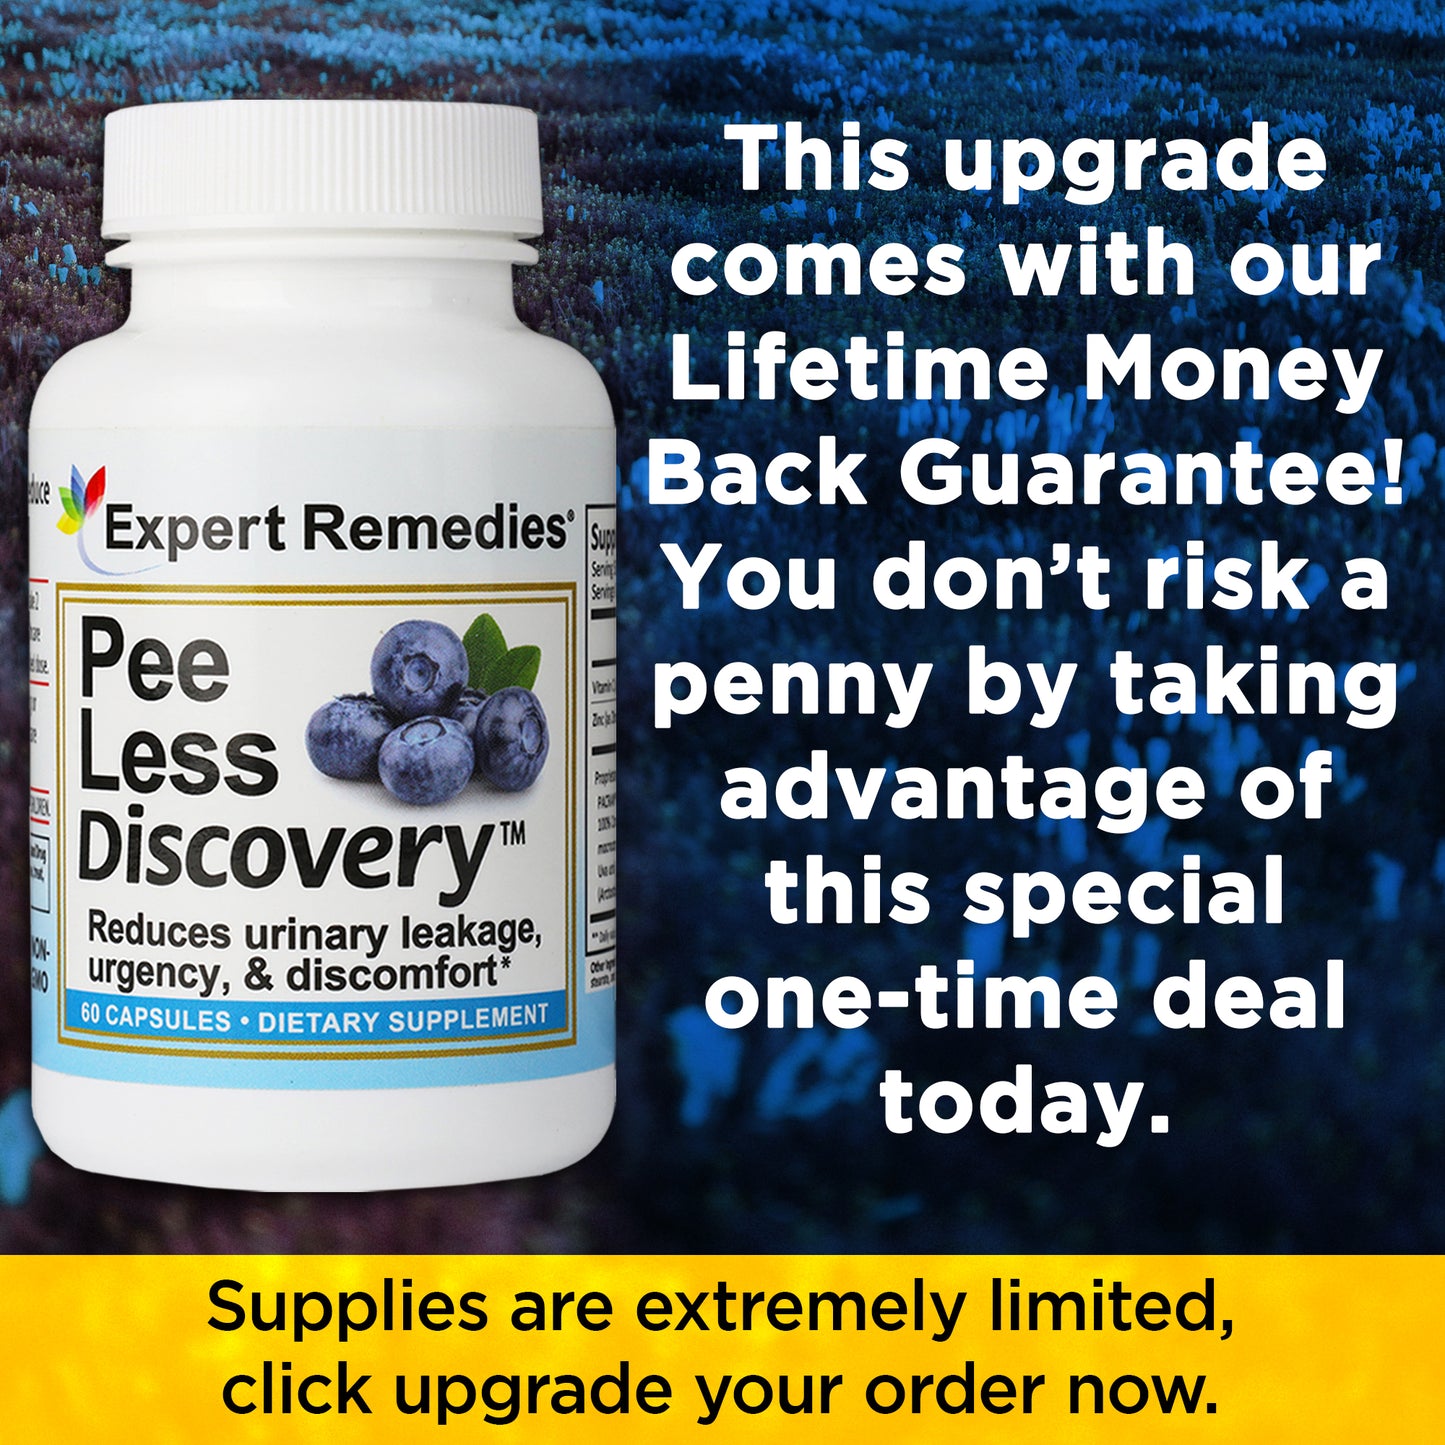 Pee Less Discovery Buy 2 Get 1 Free for $33.29 per bottle